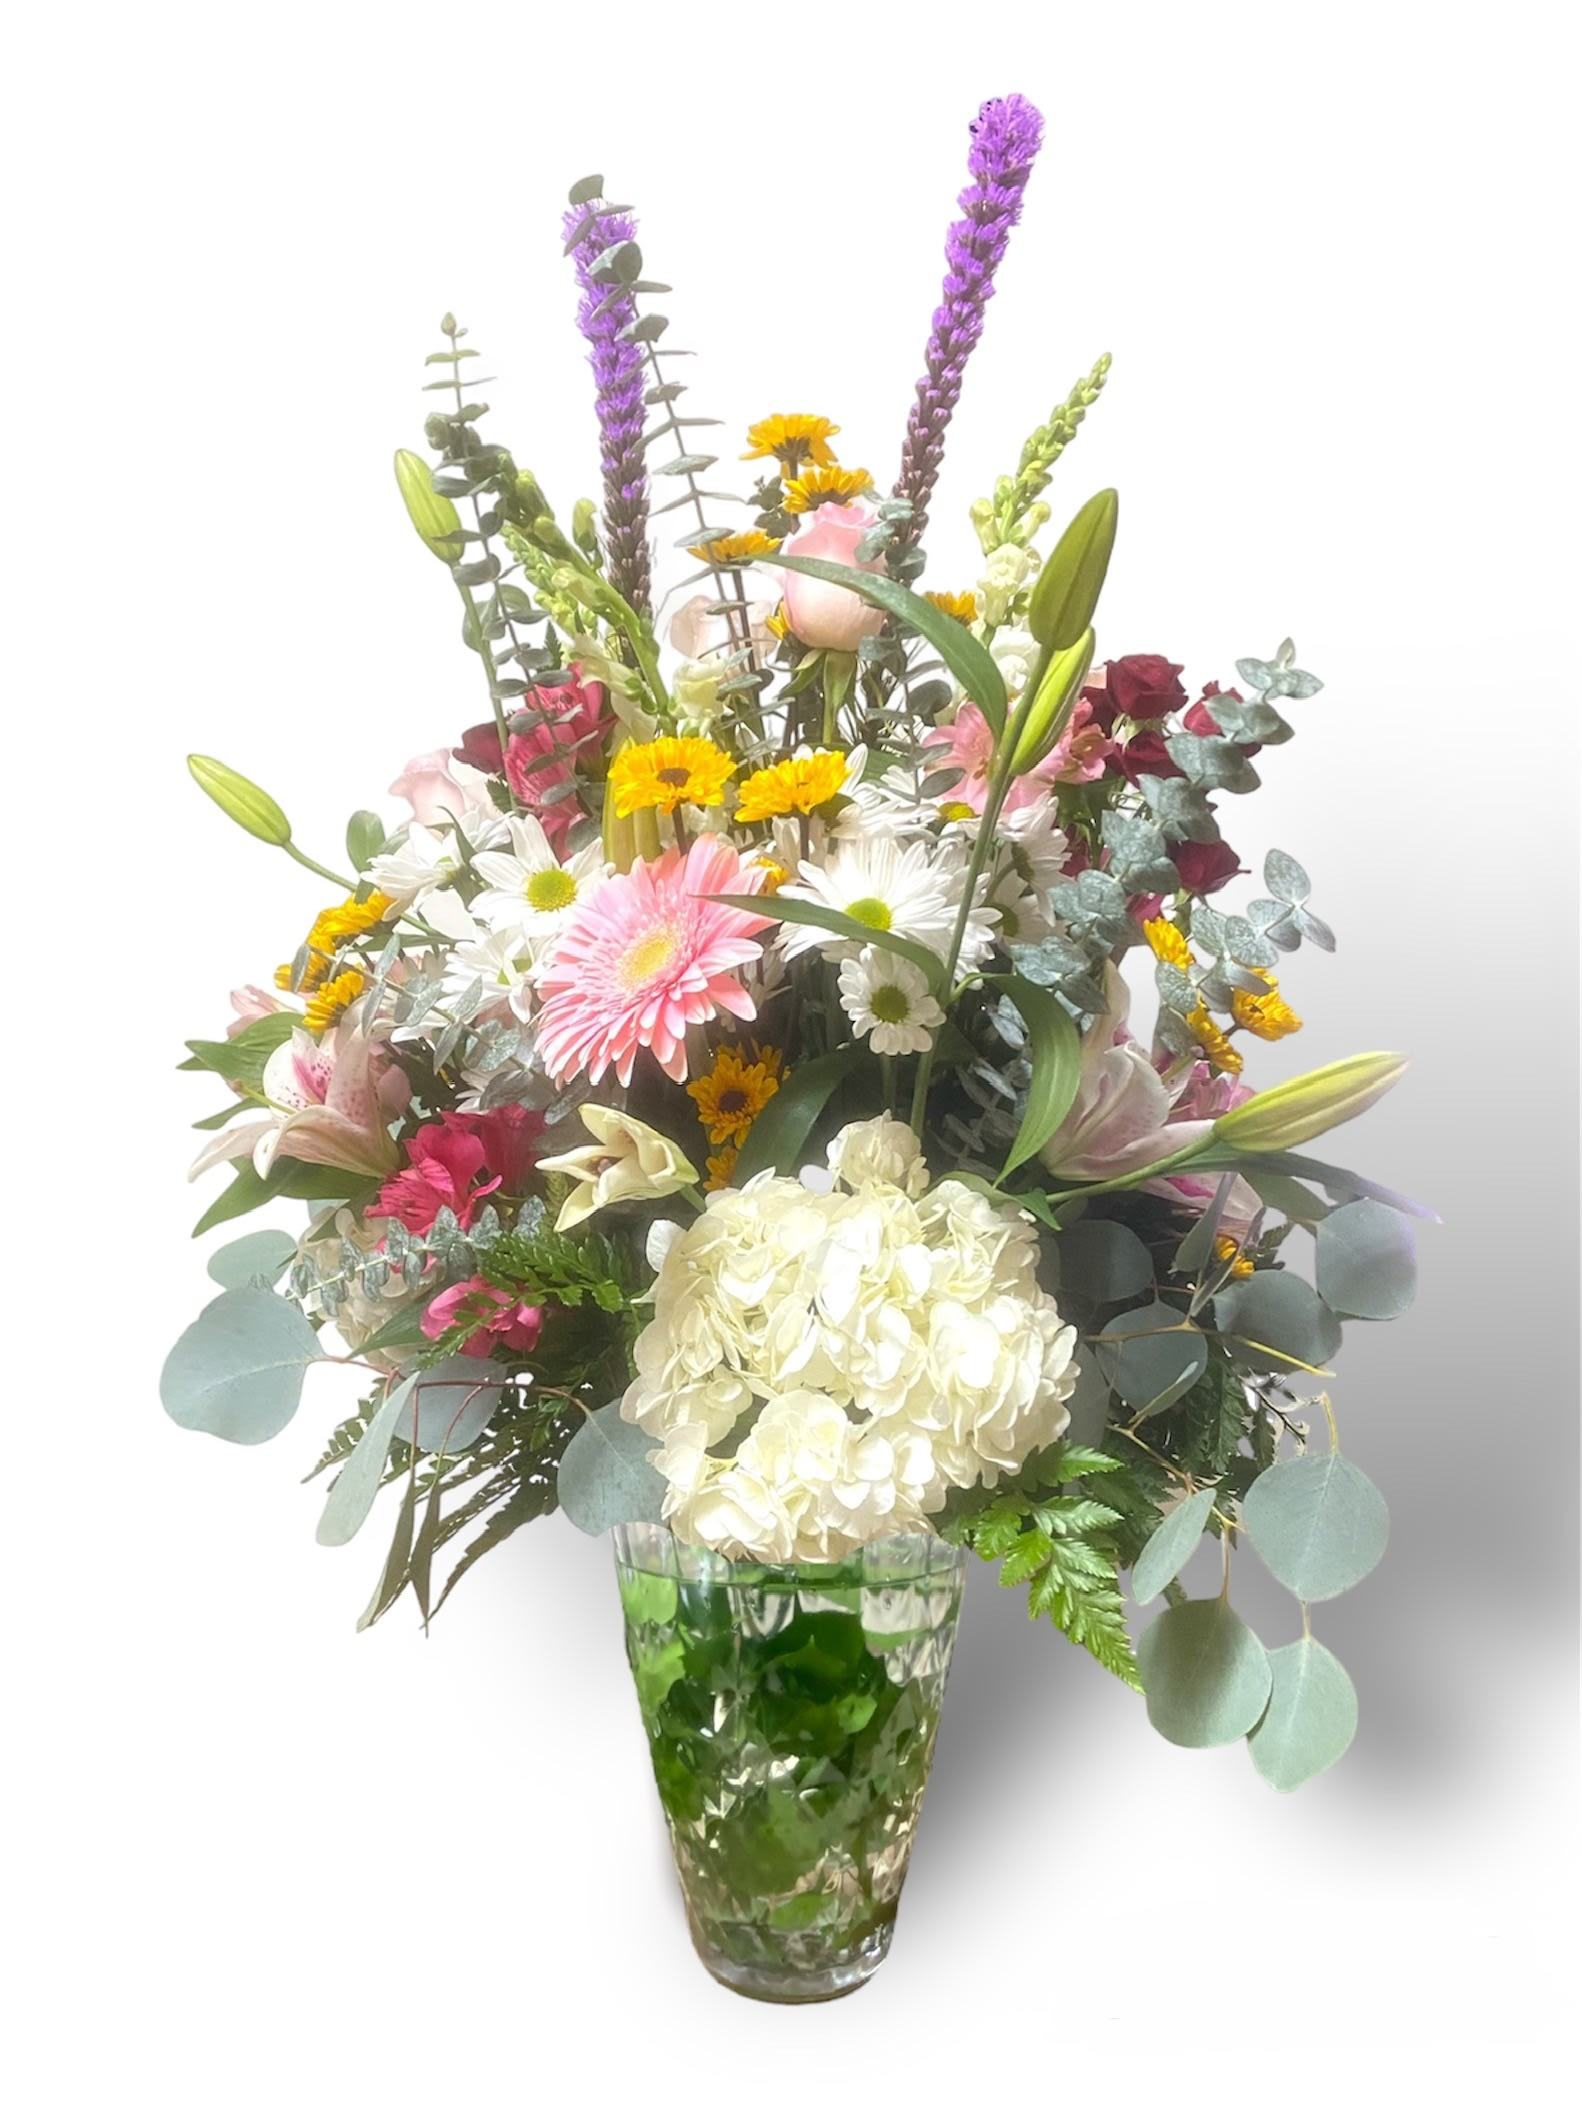 Grand Garden - This beautiful arrangement is like walking through the grand Garden of an old estate, beautiful assorted flowers, and lush foliage, arranged in a beautiful glass vase